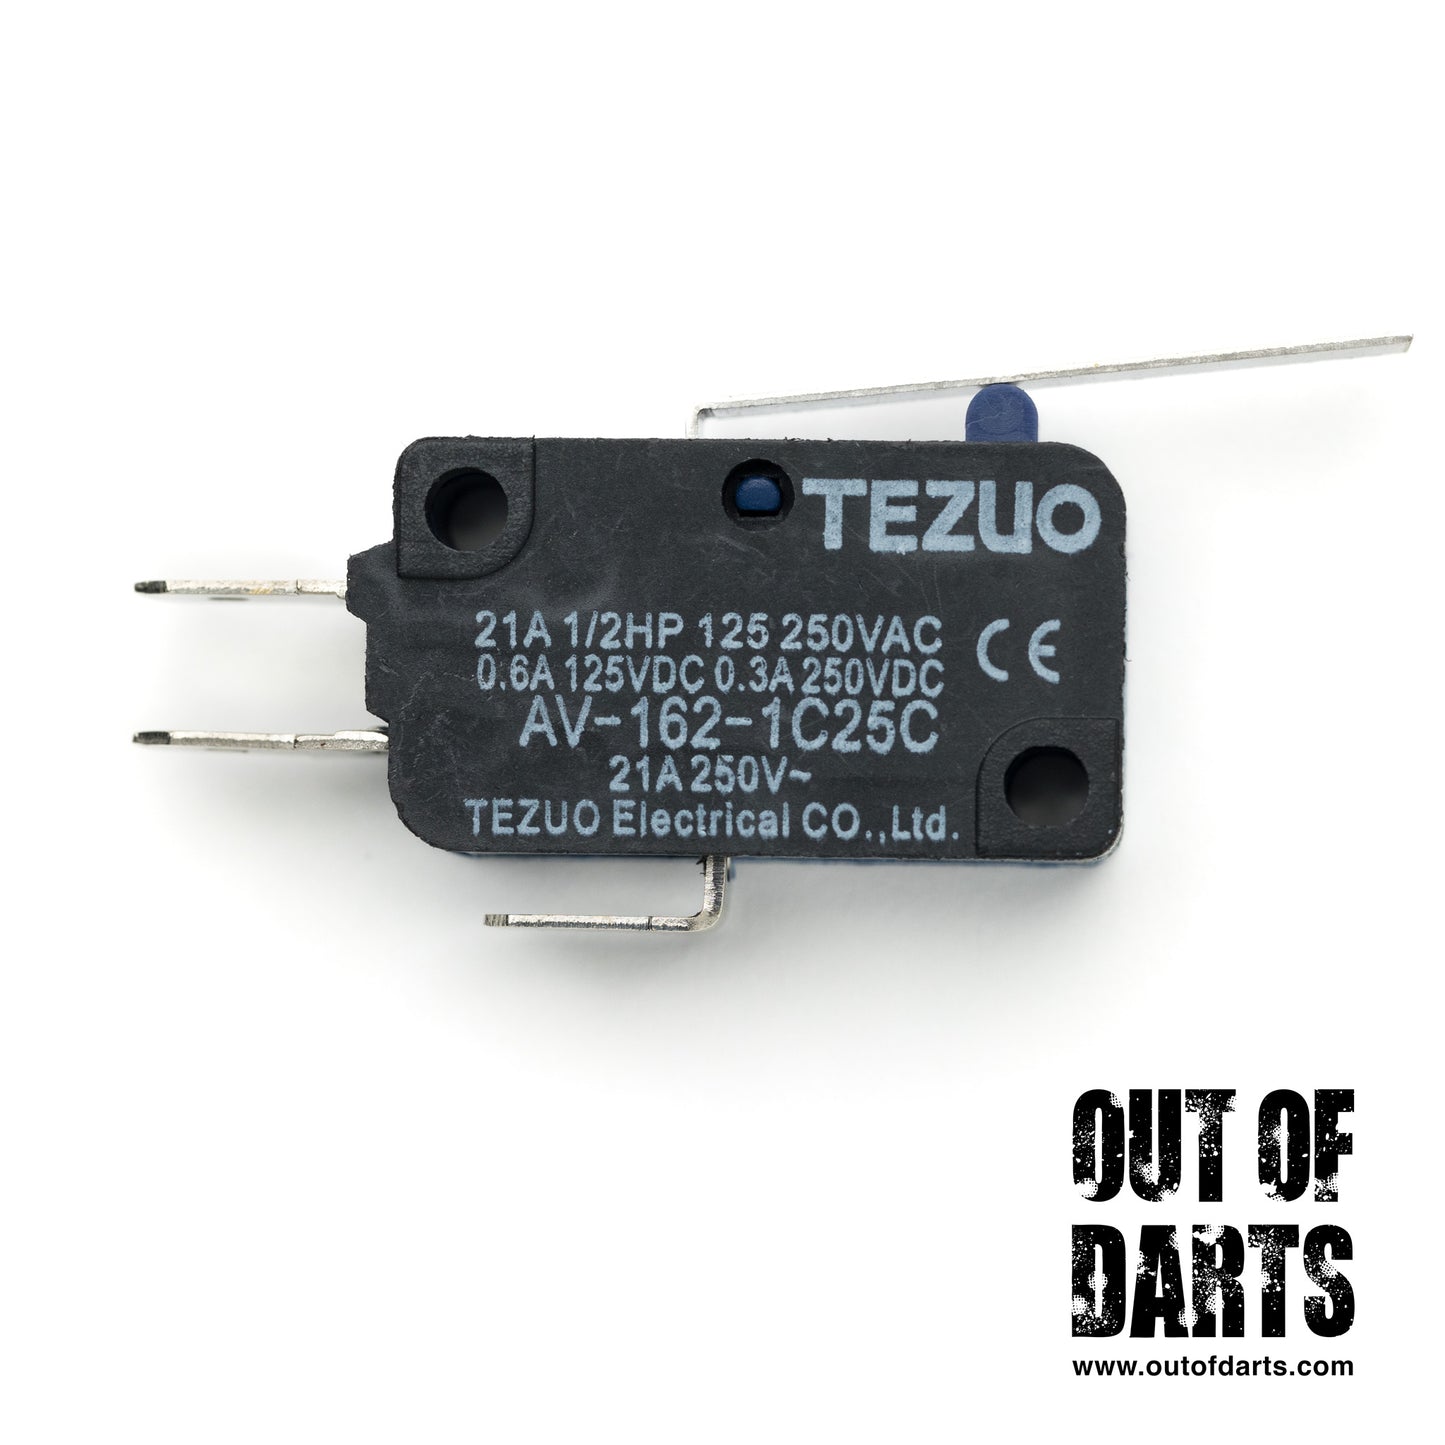 21A Microswitch Tezuo - Lever, Button, Short/Long Roller options